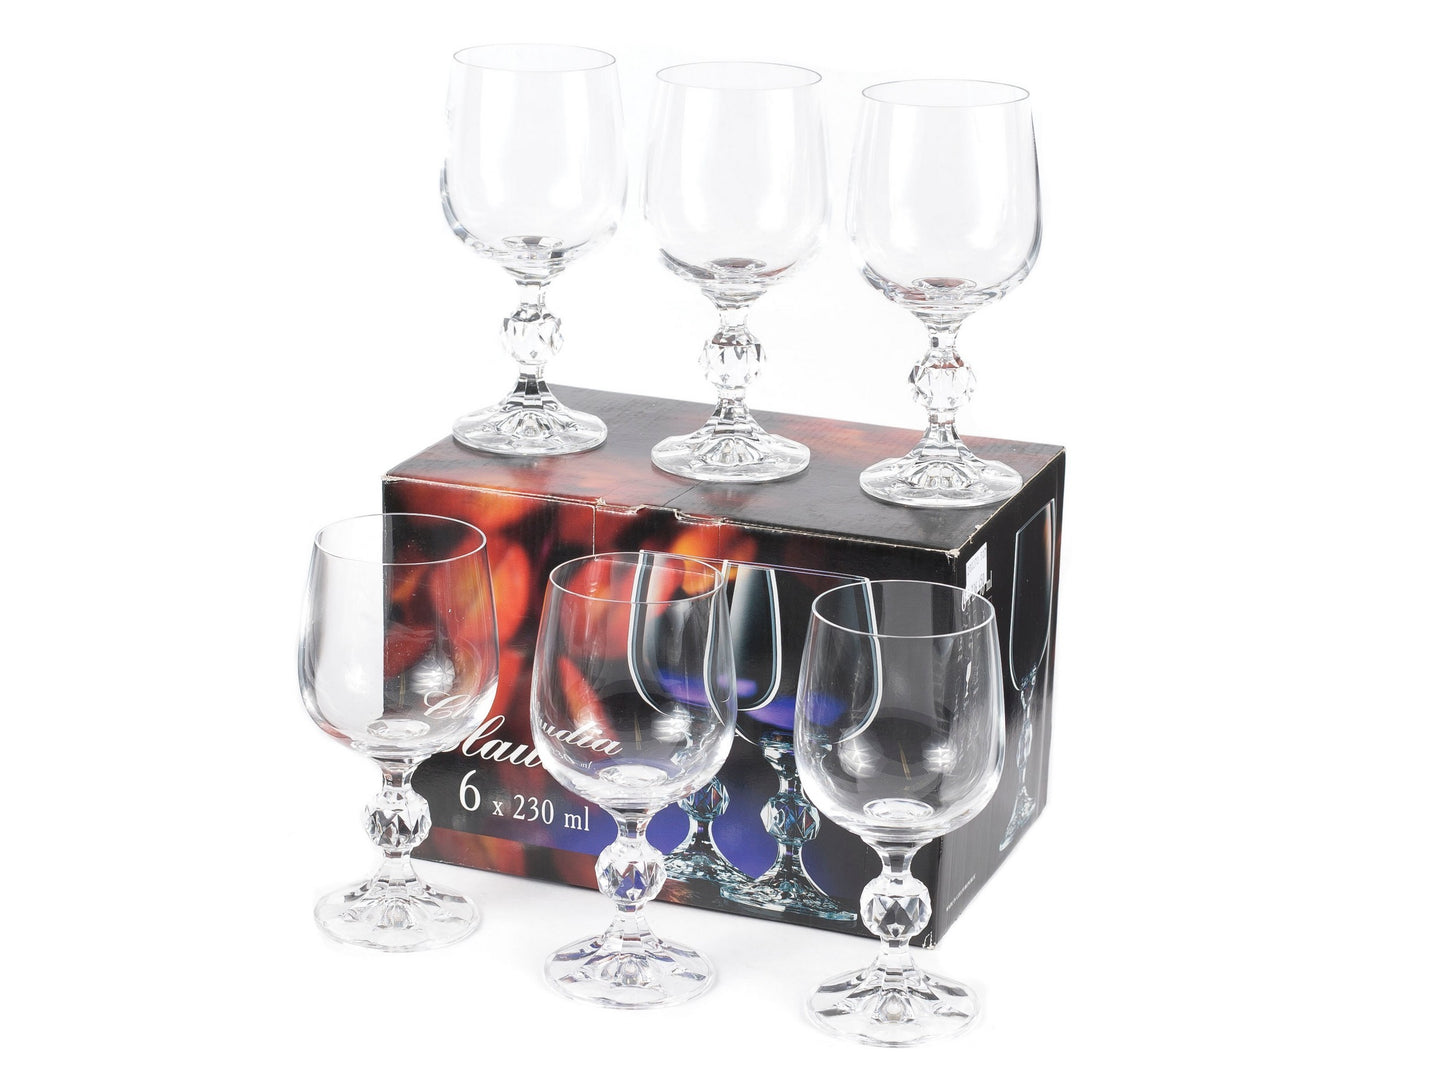 Lead-free crystal wine glass with slender stem